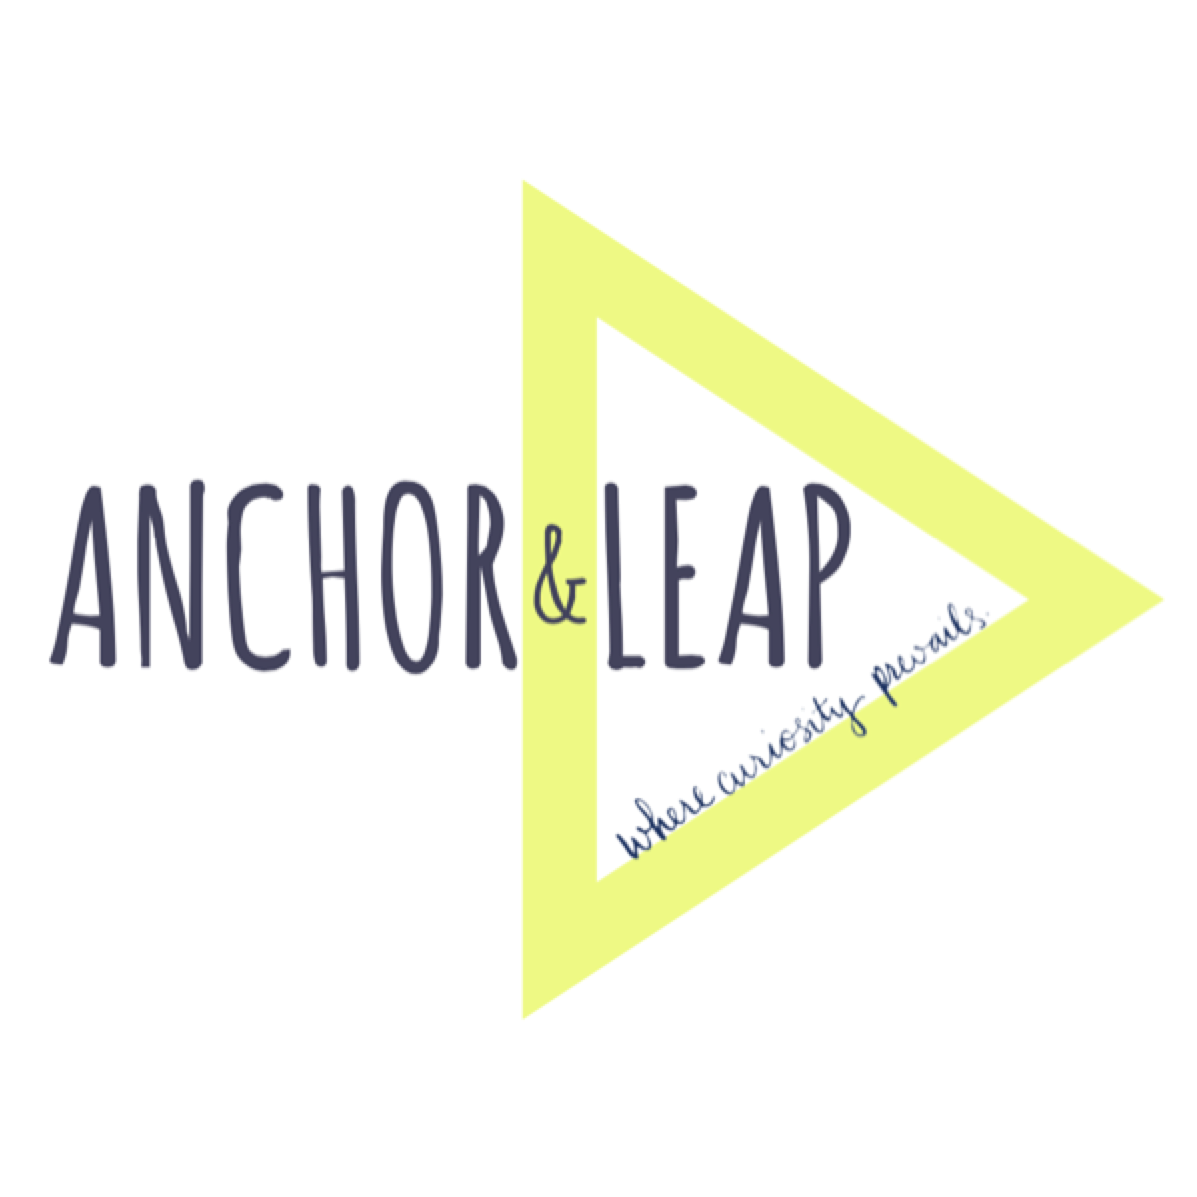 We feature stories on entrepreneurial journeys and creative leaps taken in life & business. Founder @DigitAlison Submissions- alison@anchorandleap.com